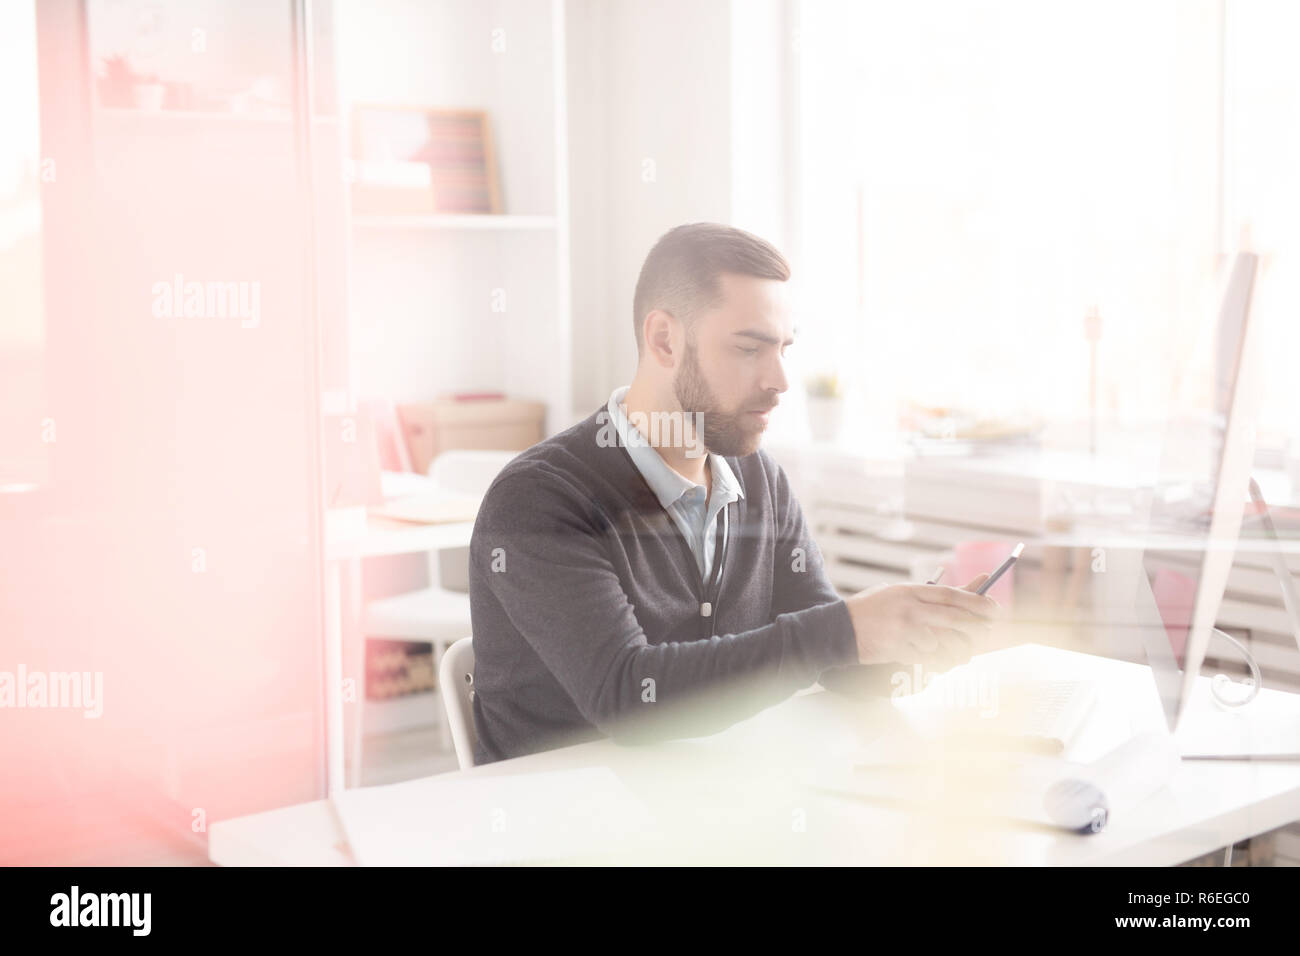 Office Worker Using Smartphone Stock Photo